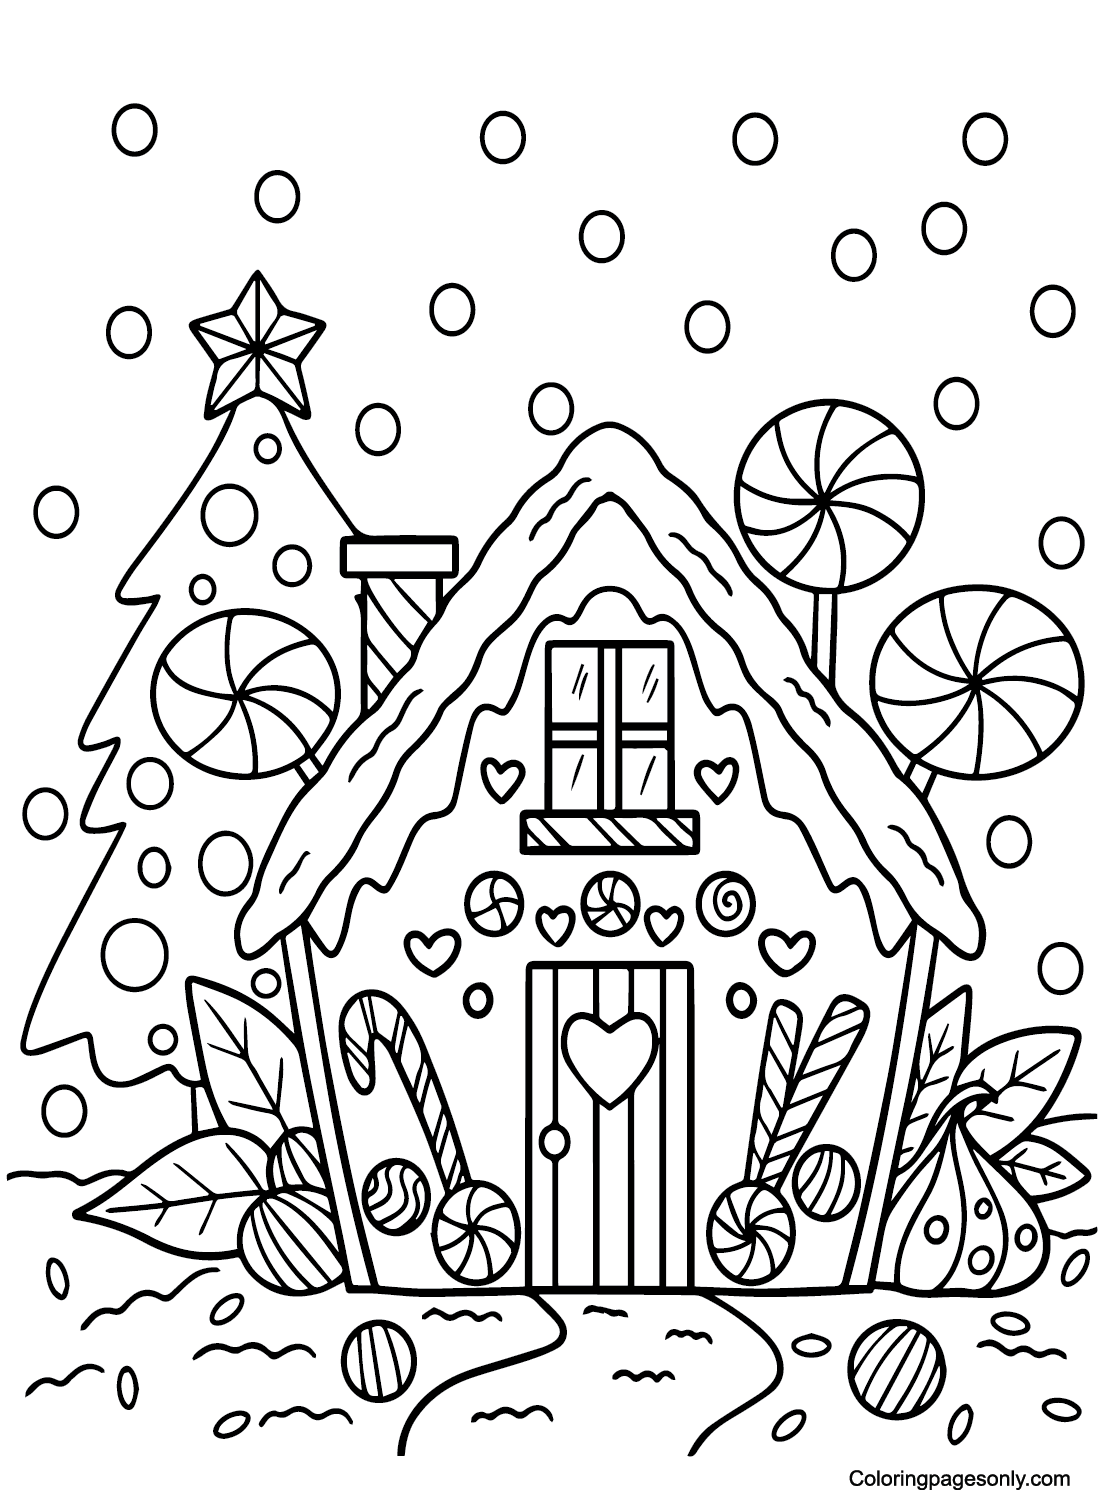 Candyland Images Coloring Pages